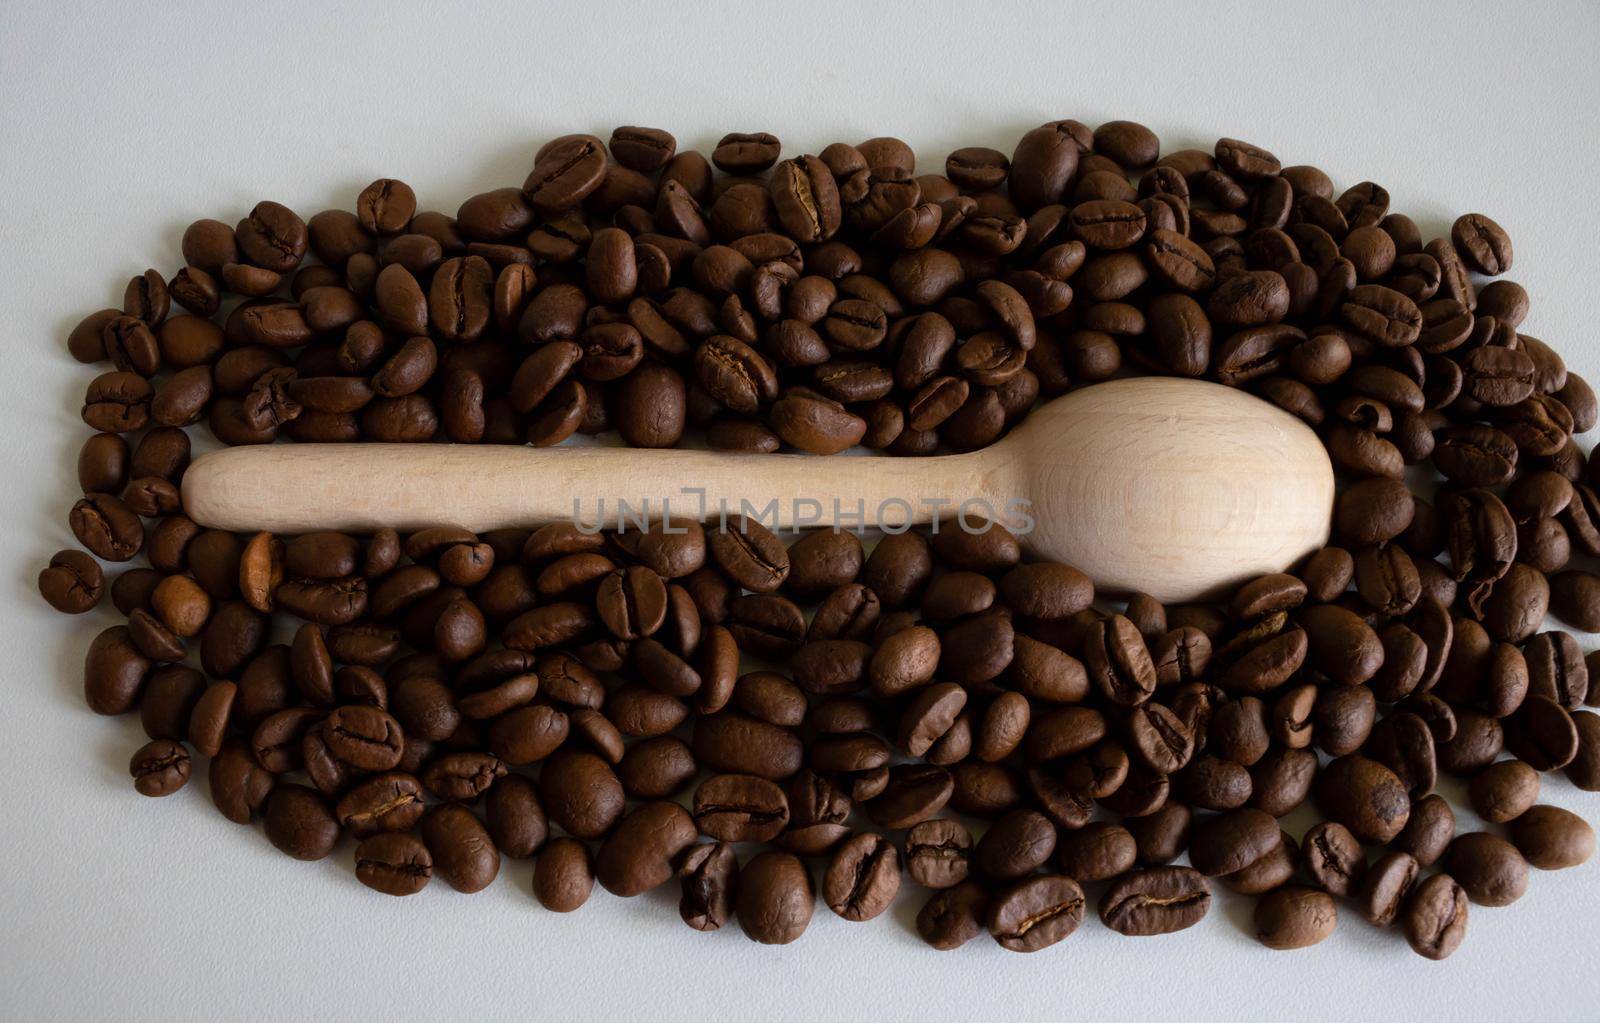 Aromatic coffee beans in a wooden spoon, for the production of delicious coffee. Whole roasted coffee beans for grinding by lapushka62